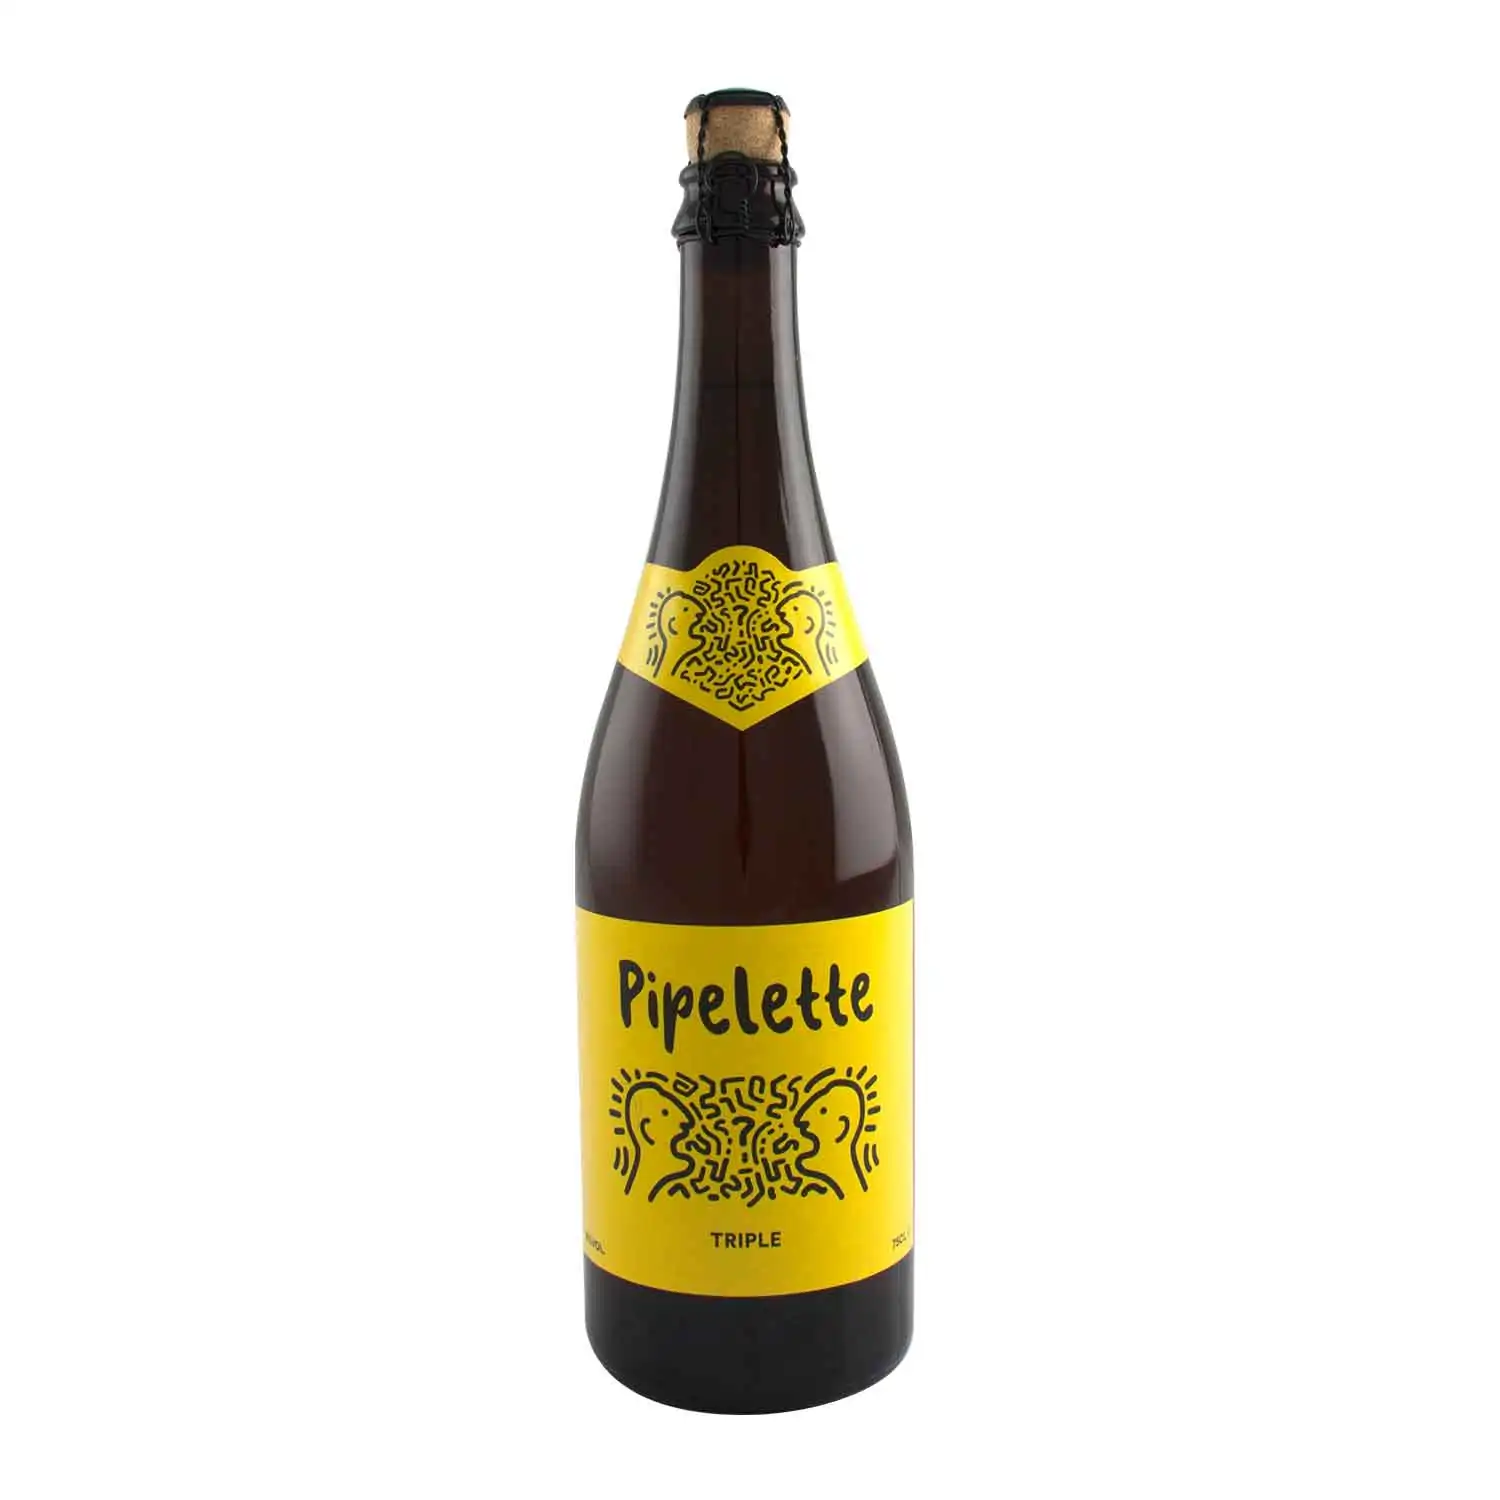 Pipelette triple 75cl Alc 8% - Buy at Real Tobacco